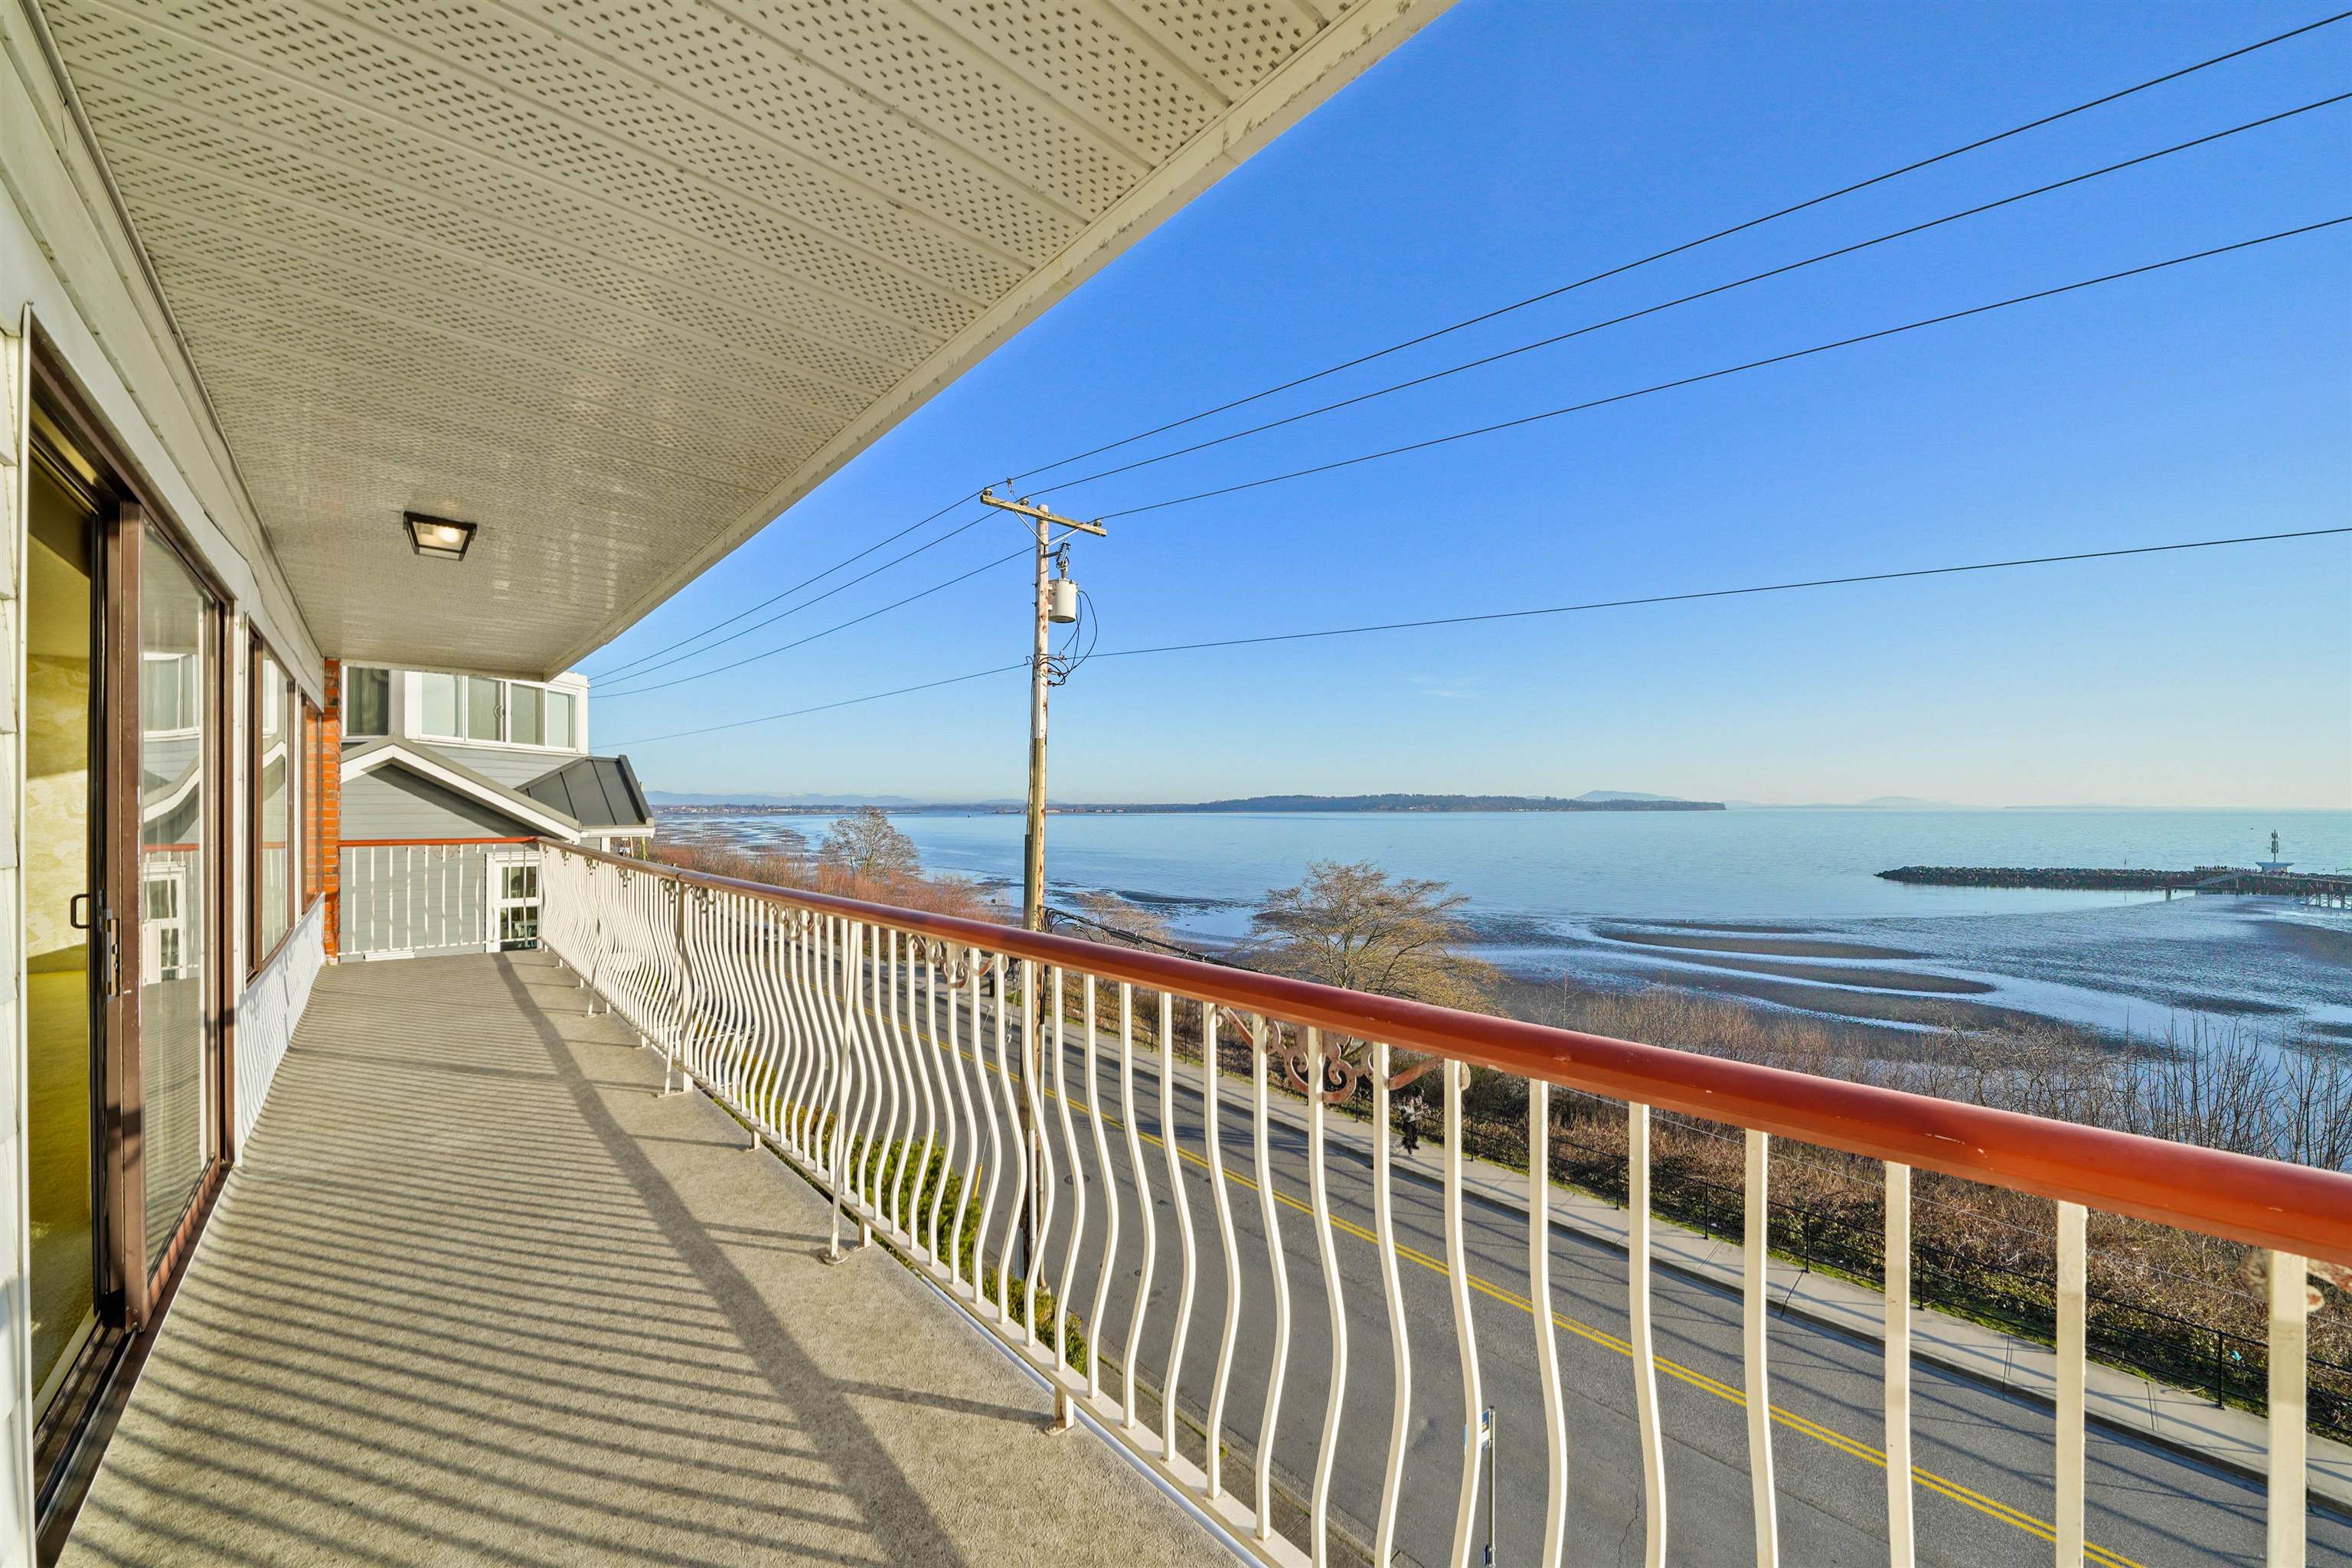 202-15147 MARINE DRIVE, White Rock, British Columbia, 2 Bedrooms Bedrooms, ,2 BathroomsBathrooms,Residential Attached,For Sale,R2863195